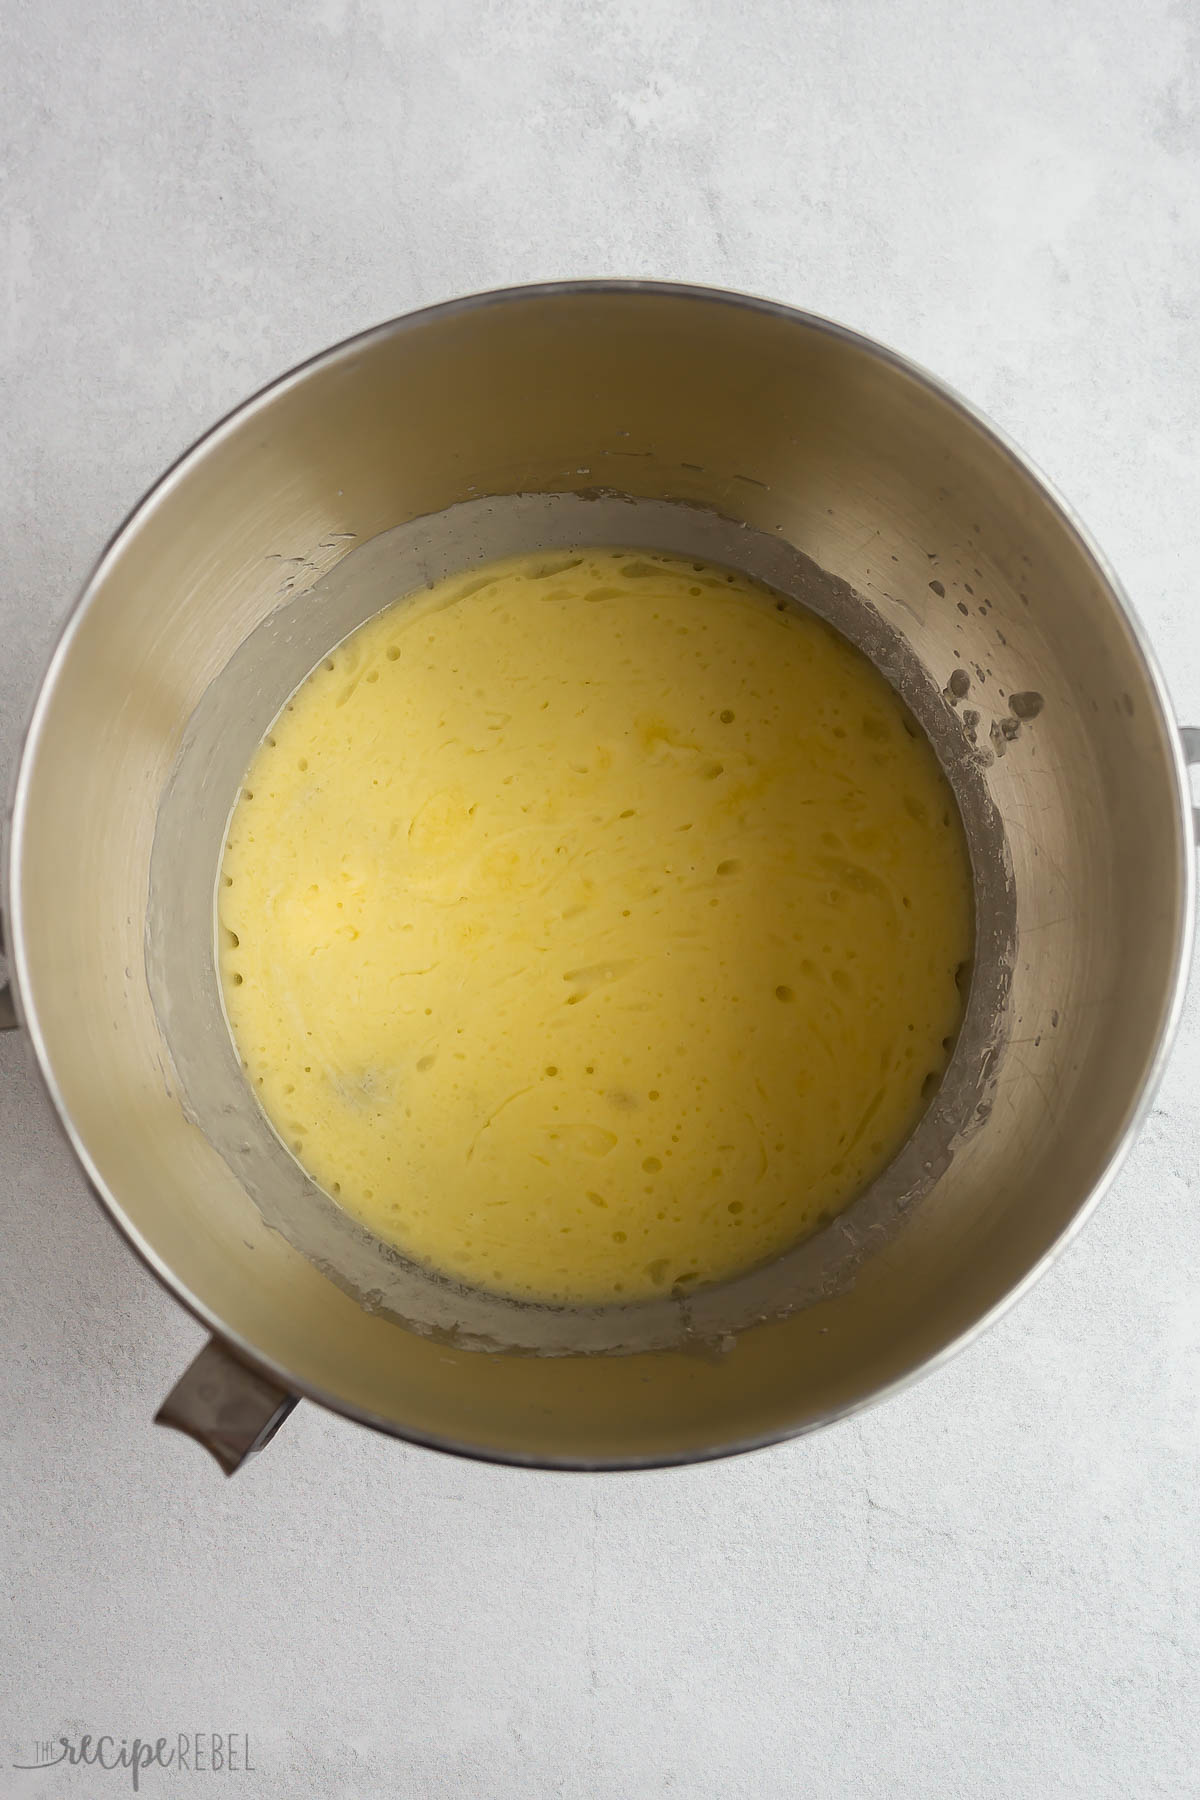 melted butter ready to add yeast mixture